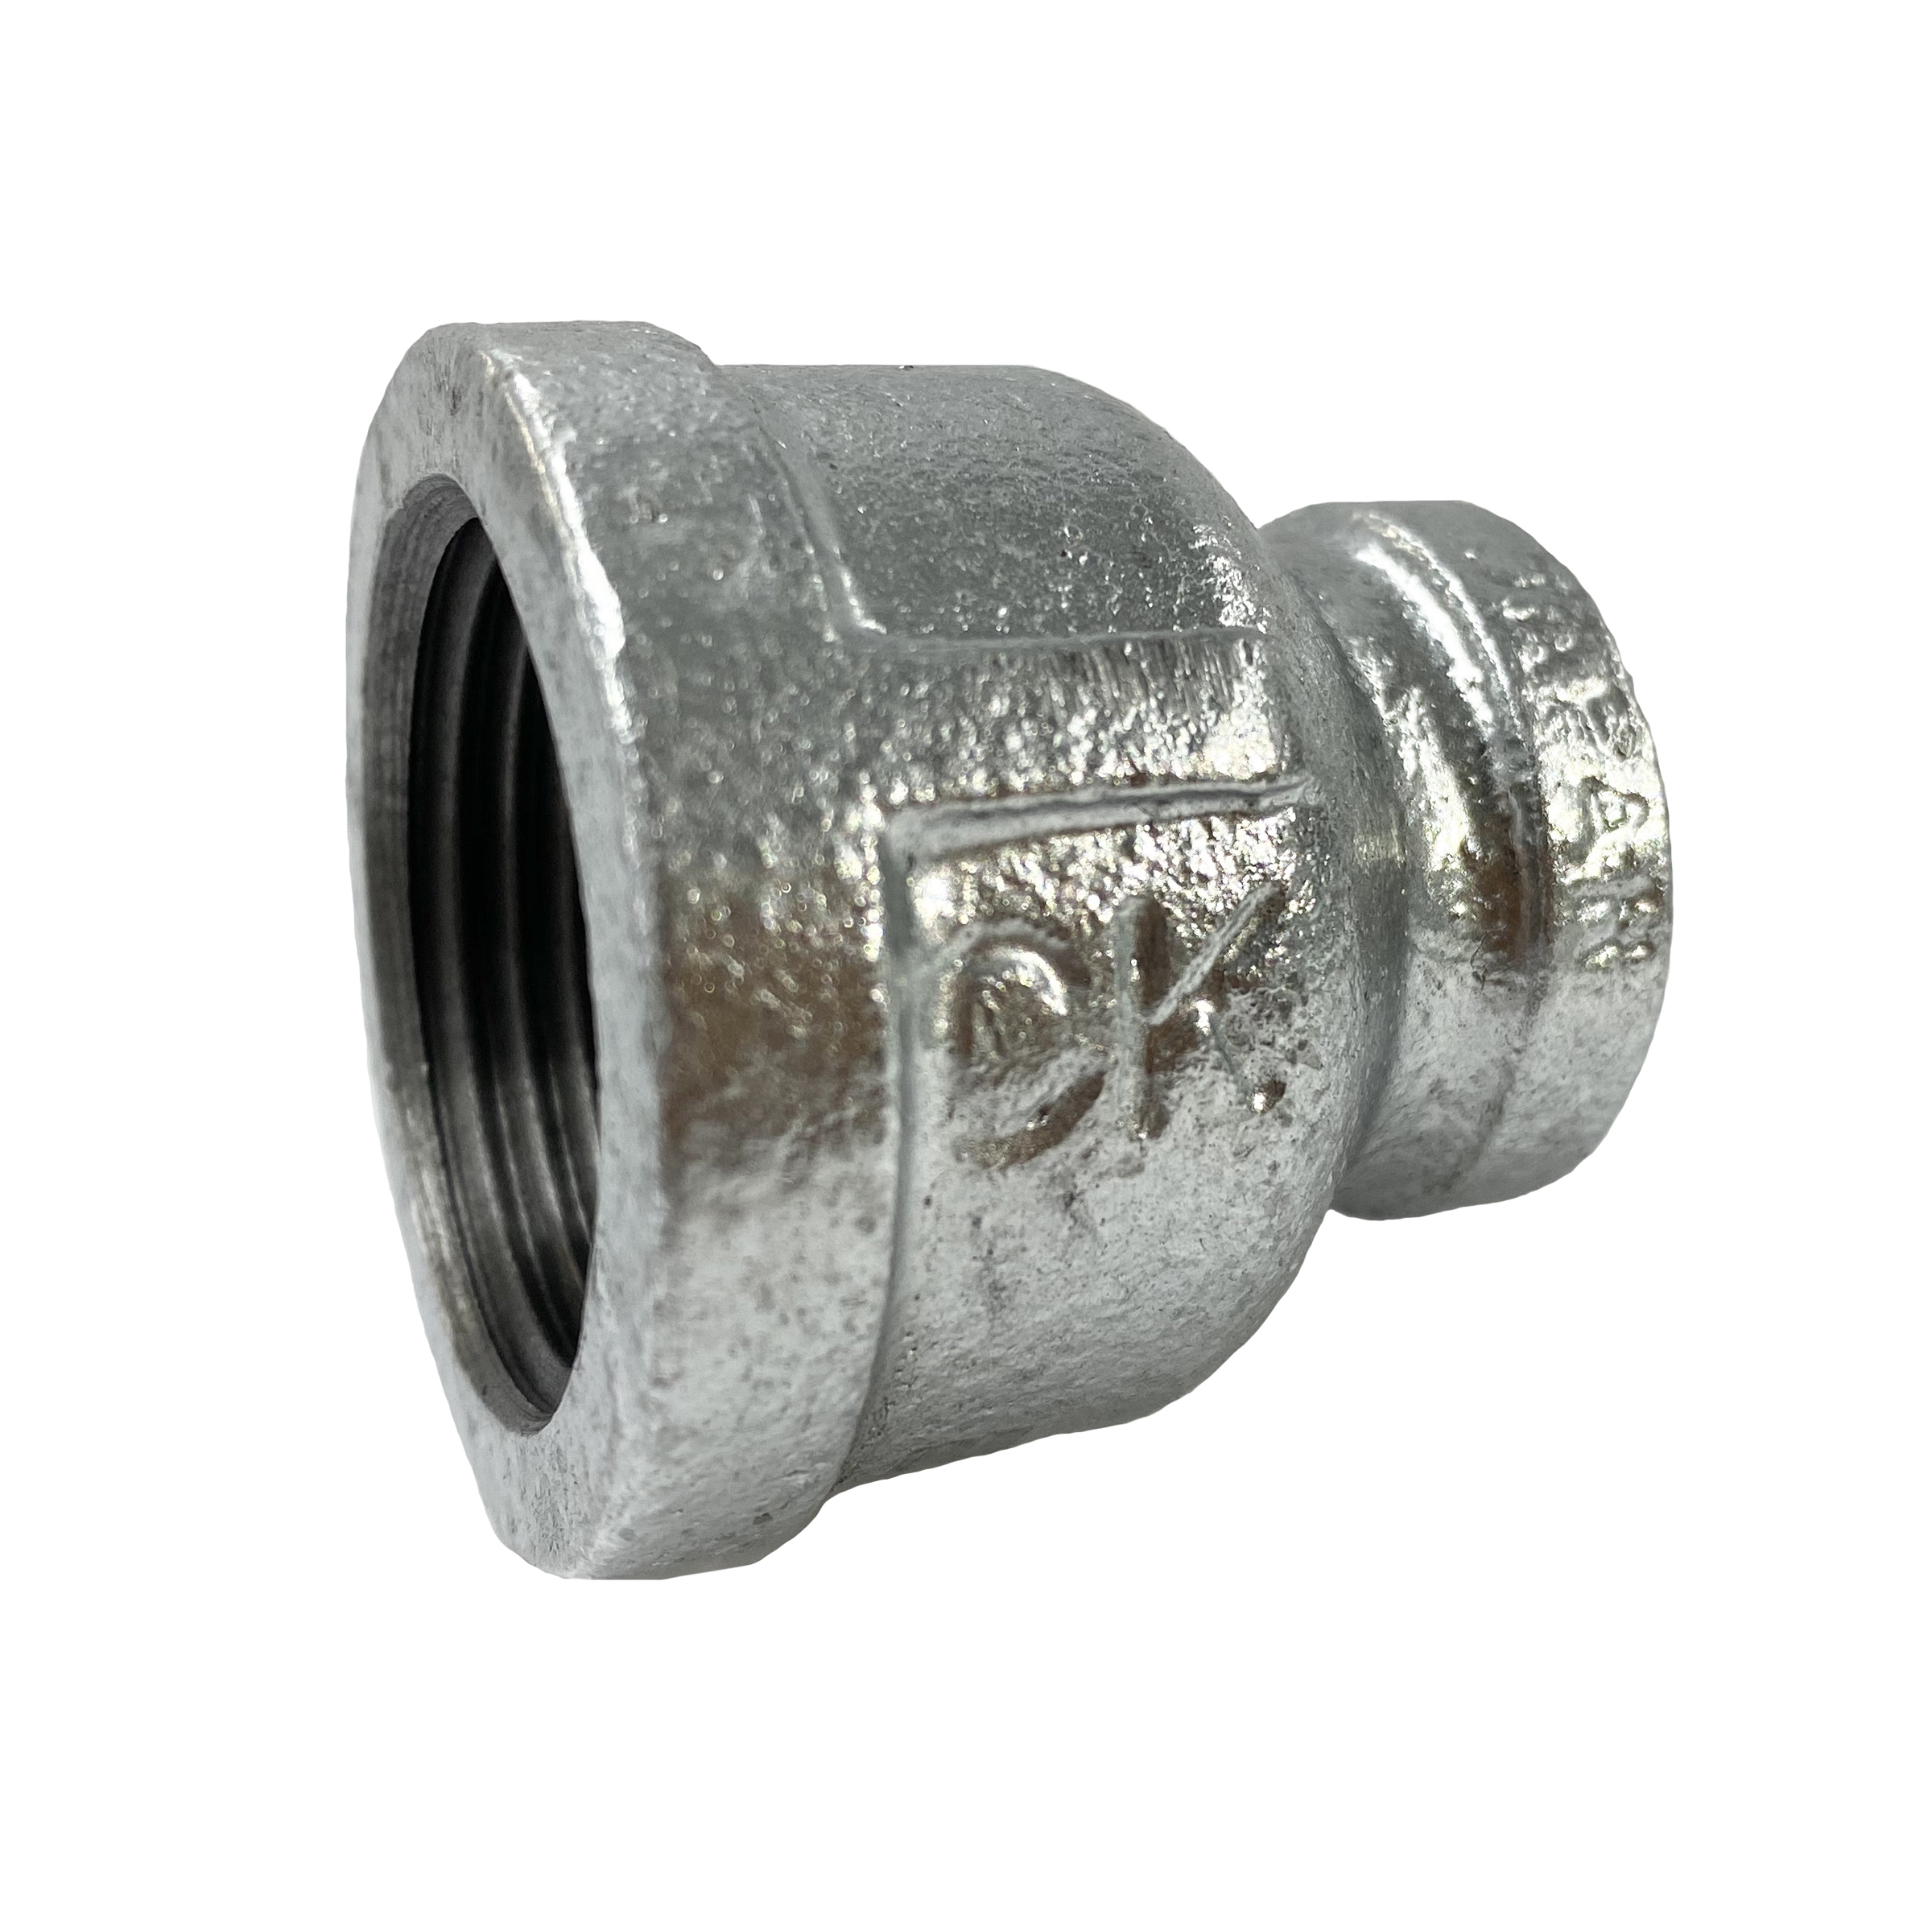 CK Fittings - Screw-in Type Malleable Cast Iron Pipe Fitting - Socket with Different Diameters with Band BRS-20X15-W